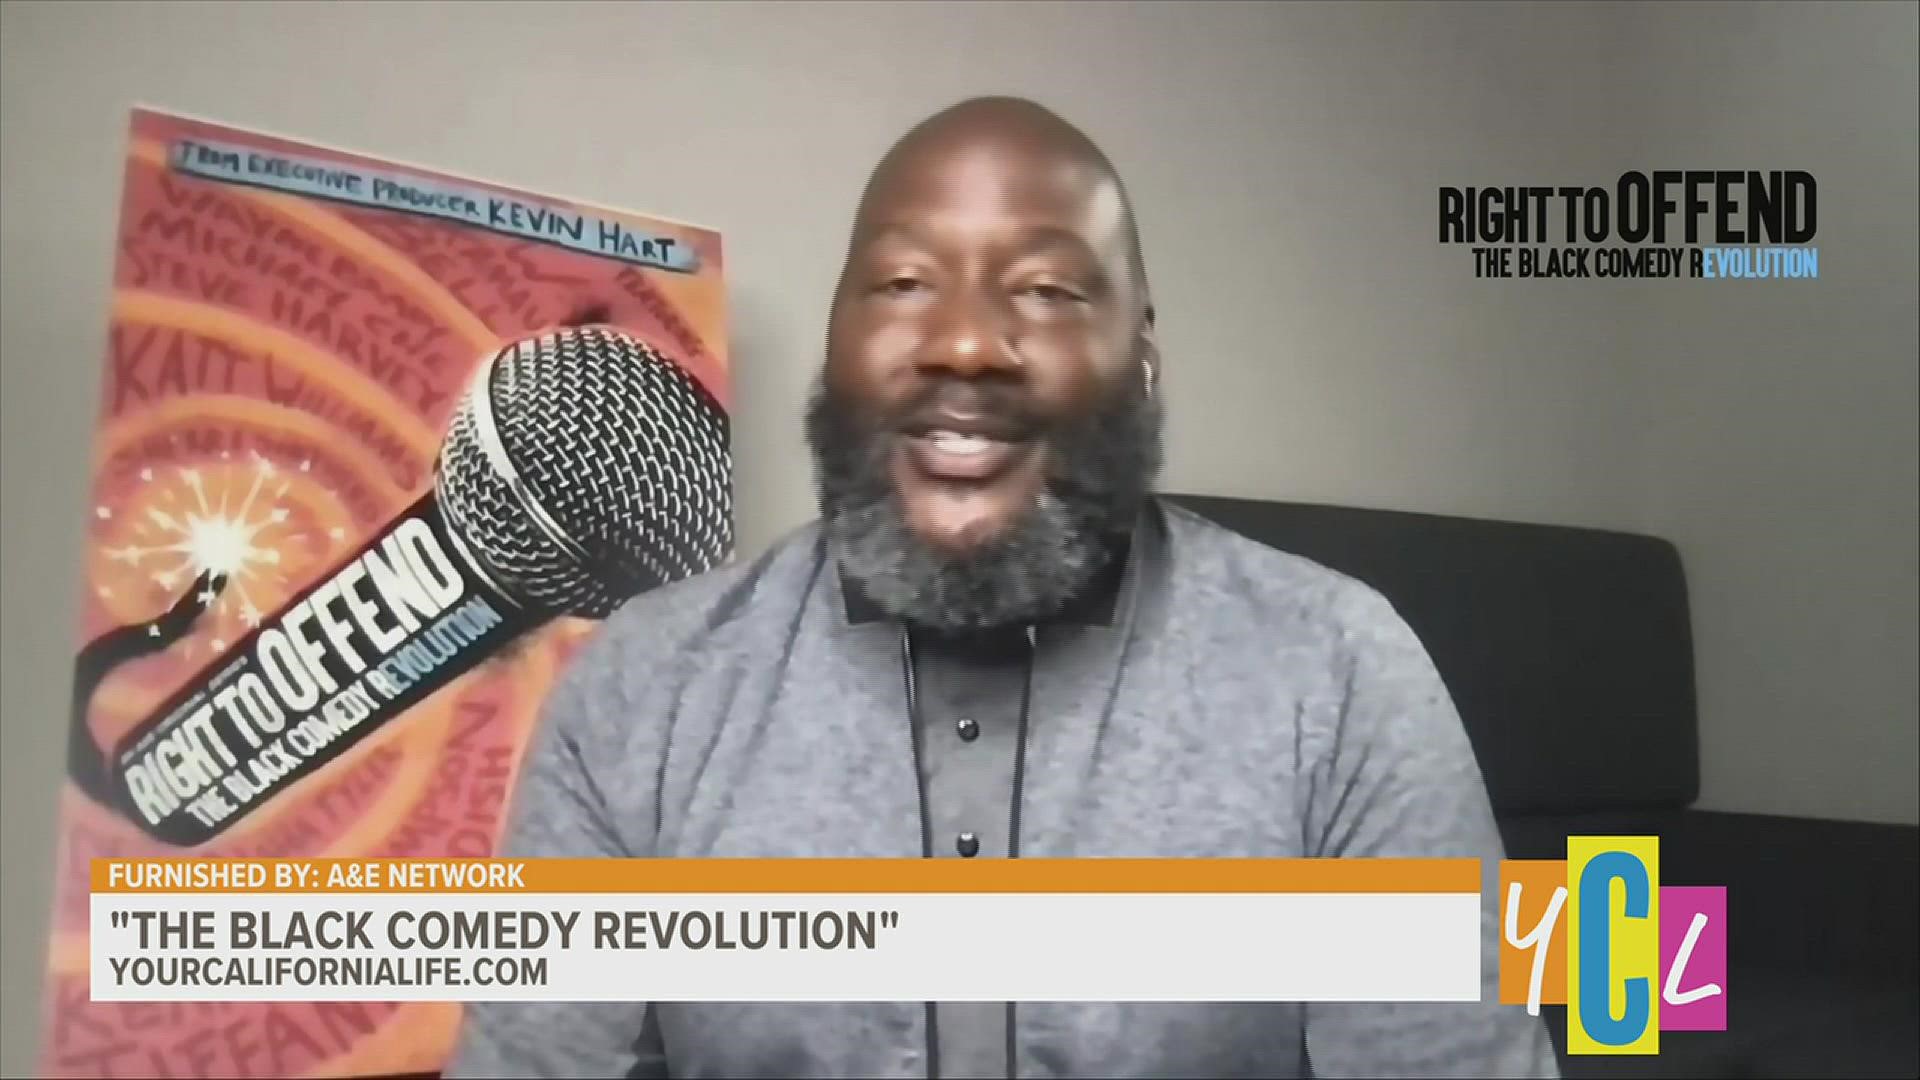 Get ready to laugh out loud and learn about the history of Black comedy in "Right to Offend: Black Comedy Revolution" executively produced by Kevin Hart.